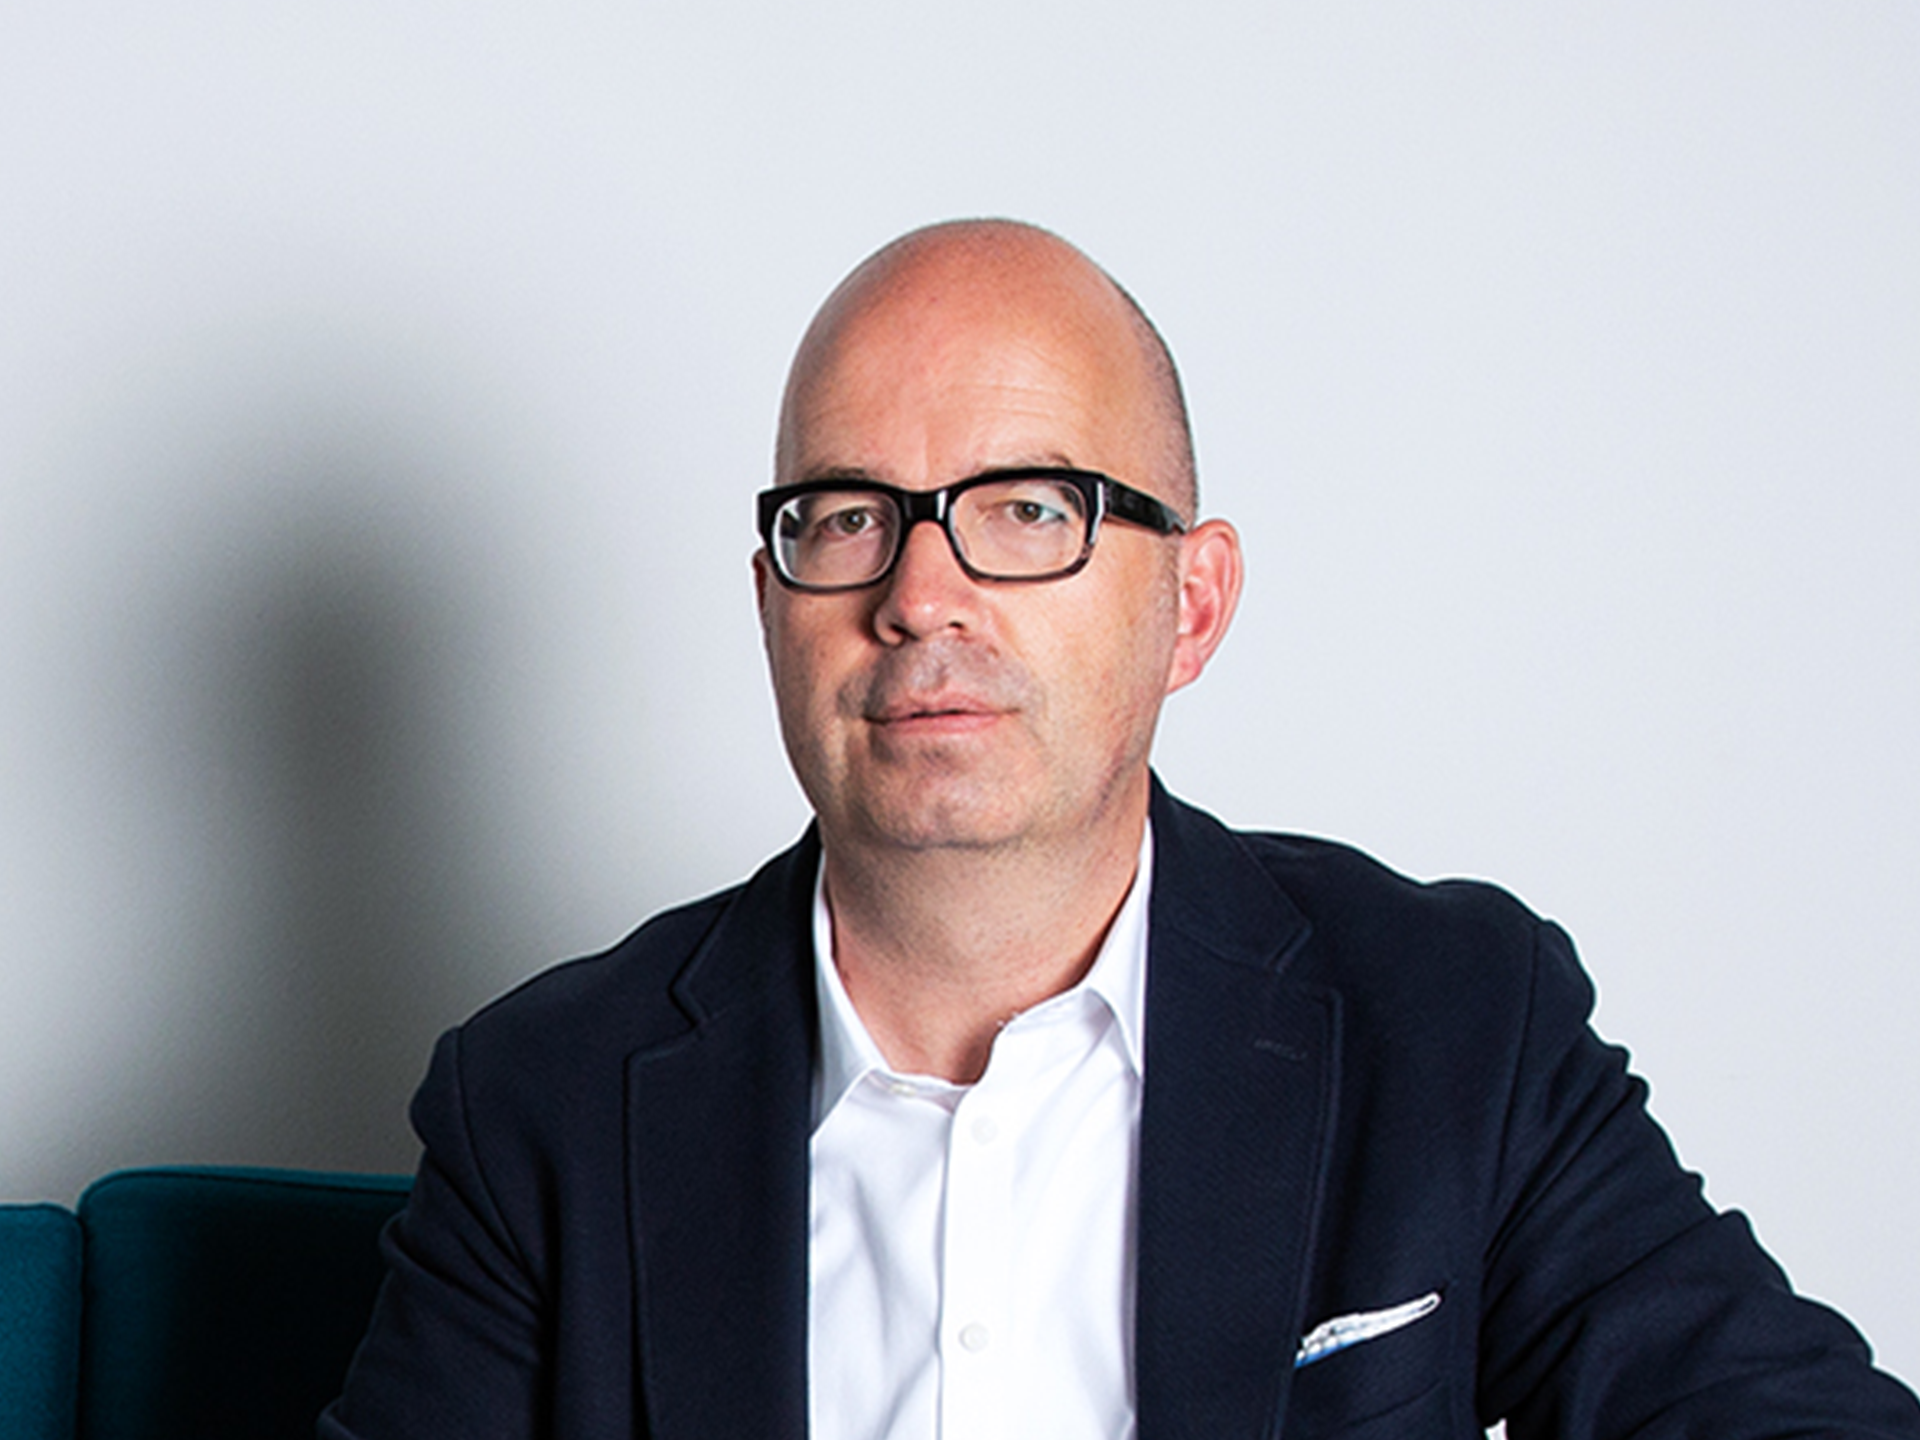 Olaf Hannemann, co-founder and chief investment officer of CV VC